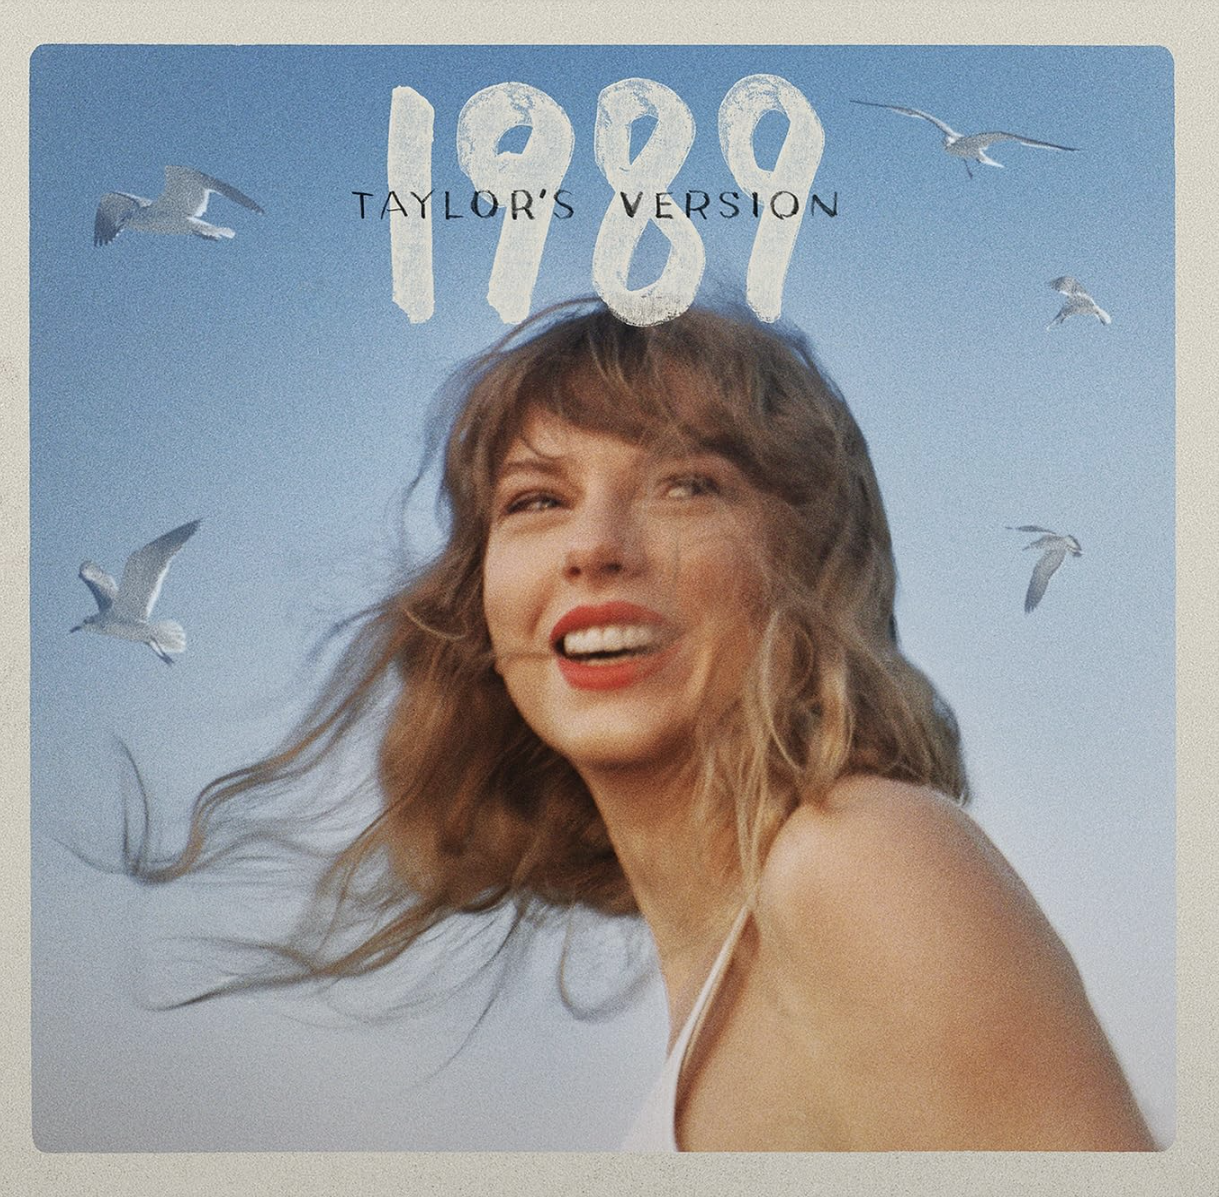 Some speculate the five seagulls on the new album cover, are the five seagulls “trapped” on Taylor’s shirt on the original album cover, each representing a vault track.
